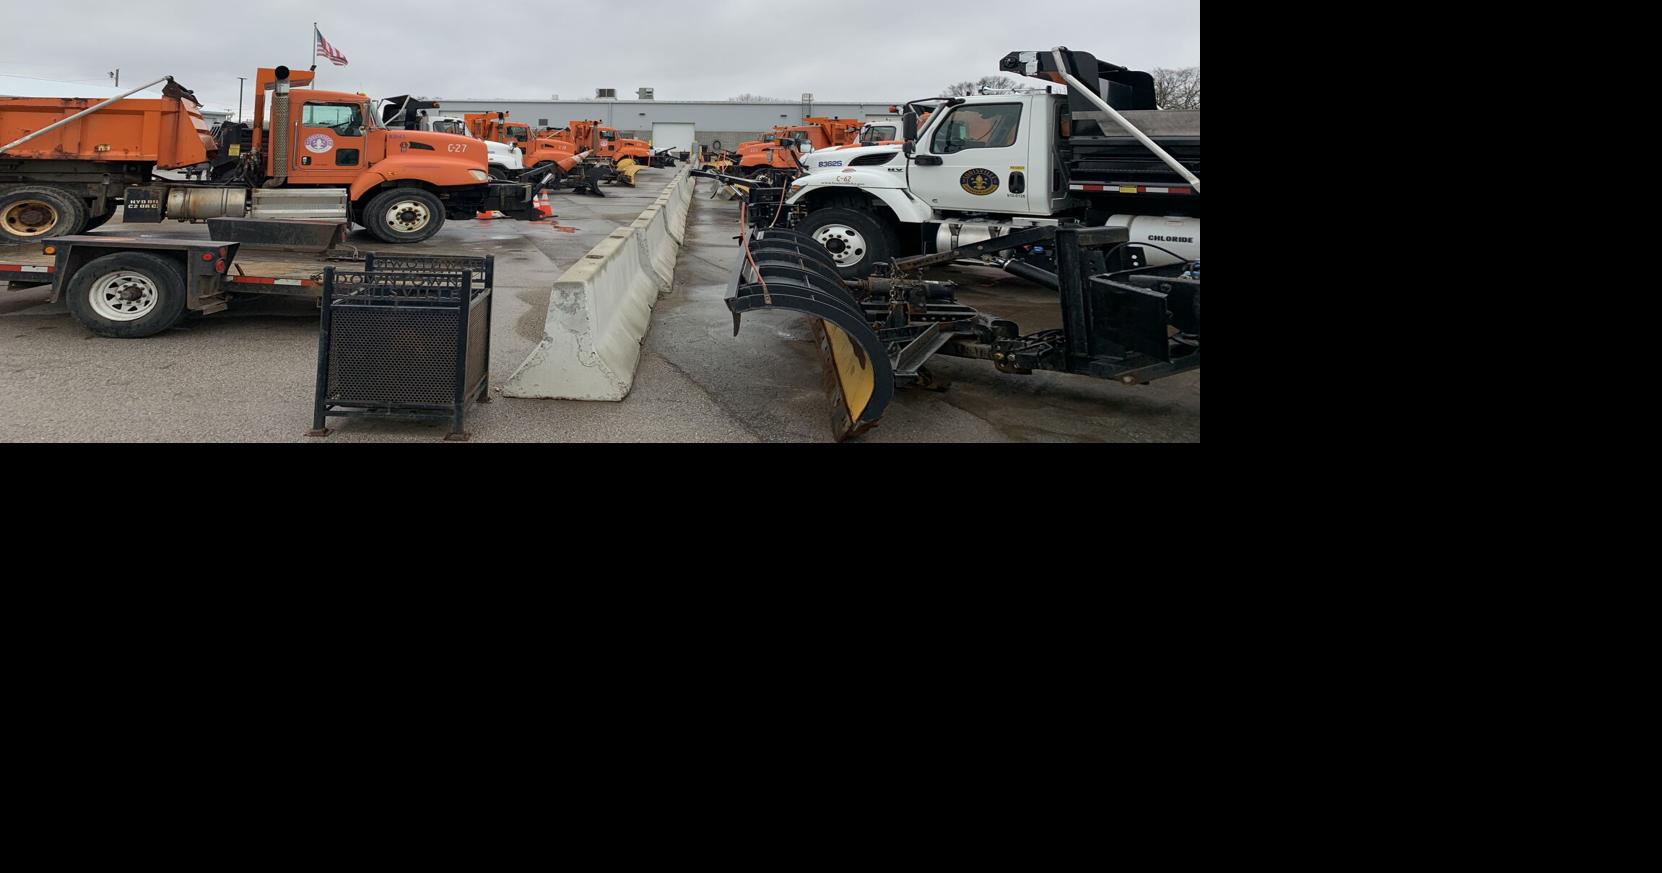 Louisville road crews preparing to tackle complex winter storm conditions | News